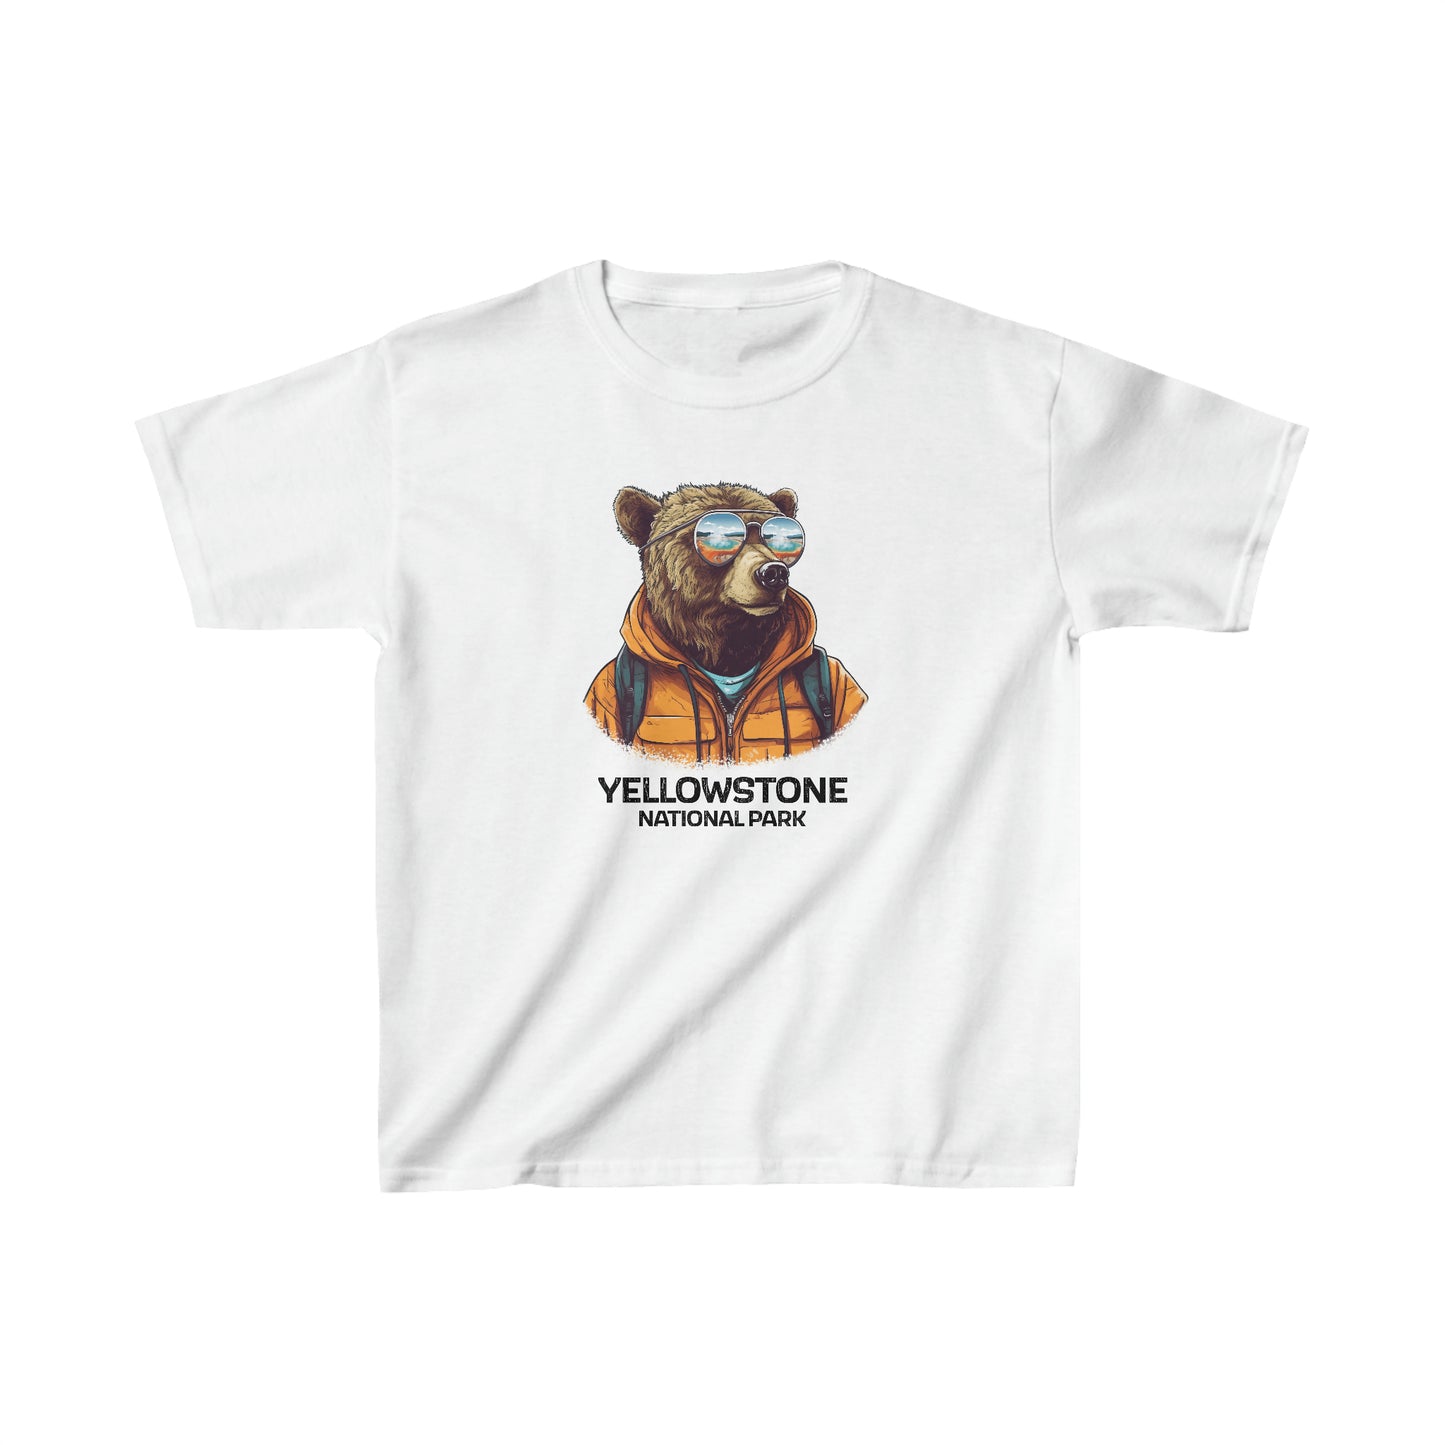 Yellowstone National Park Child T-Shirt - Cool Grizzly Bear